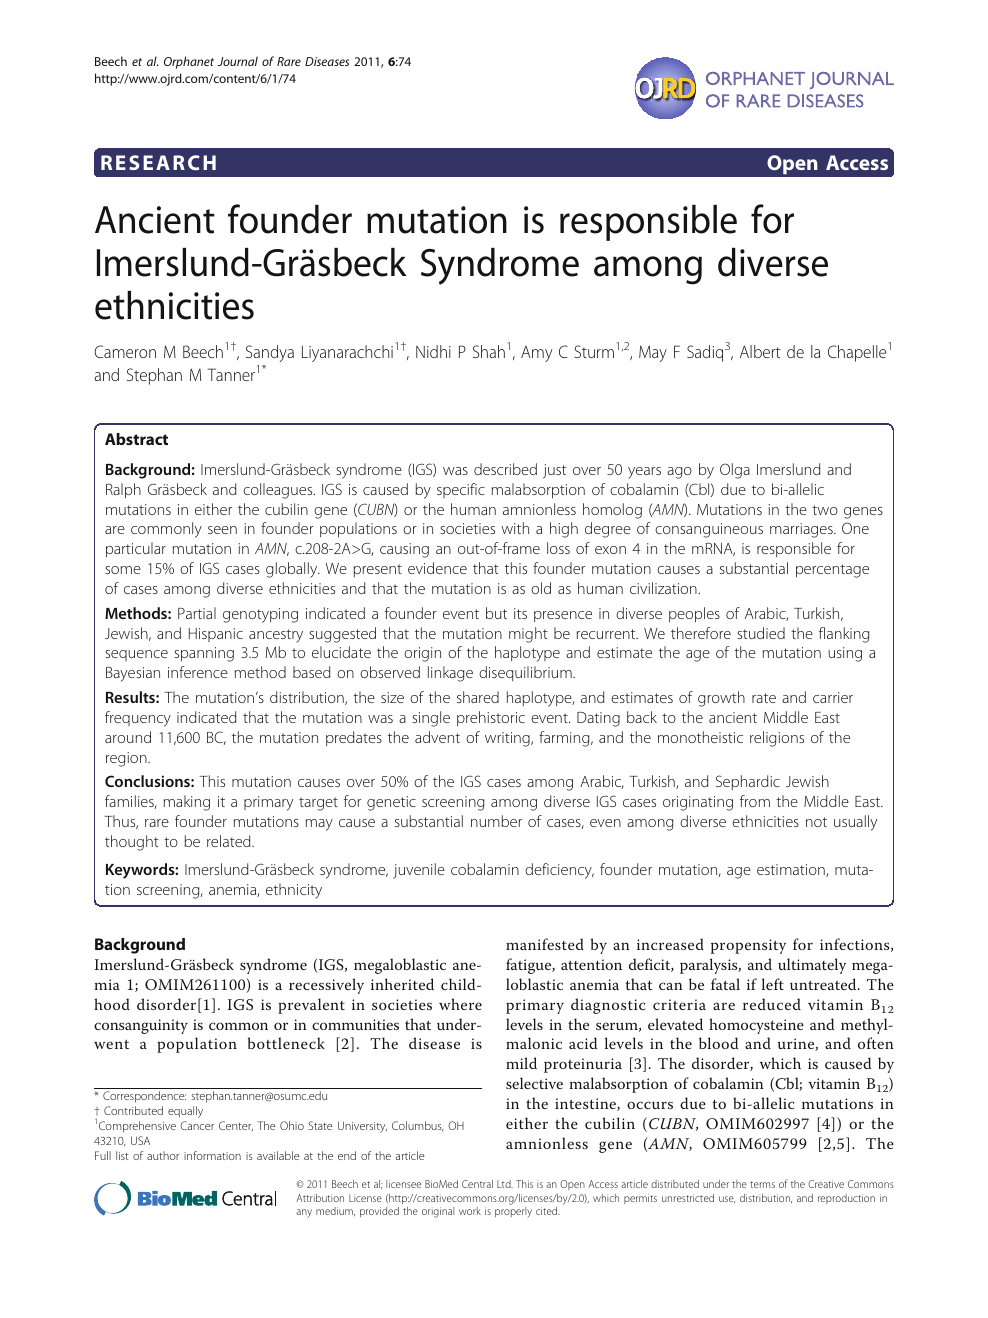 Ancient Founder Mutation Is Responsible For Imerslund Grasbeck Syndrome Among Diverse Ethnicities Topic Of Research Paper In Biological Sciences Download Scholarly Article Pdf And Read For Free On Cyberleninka Open Science Hub